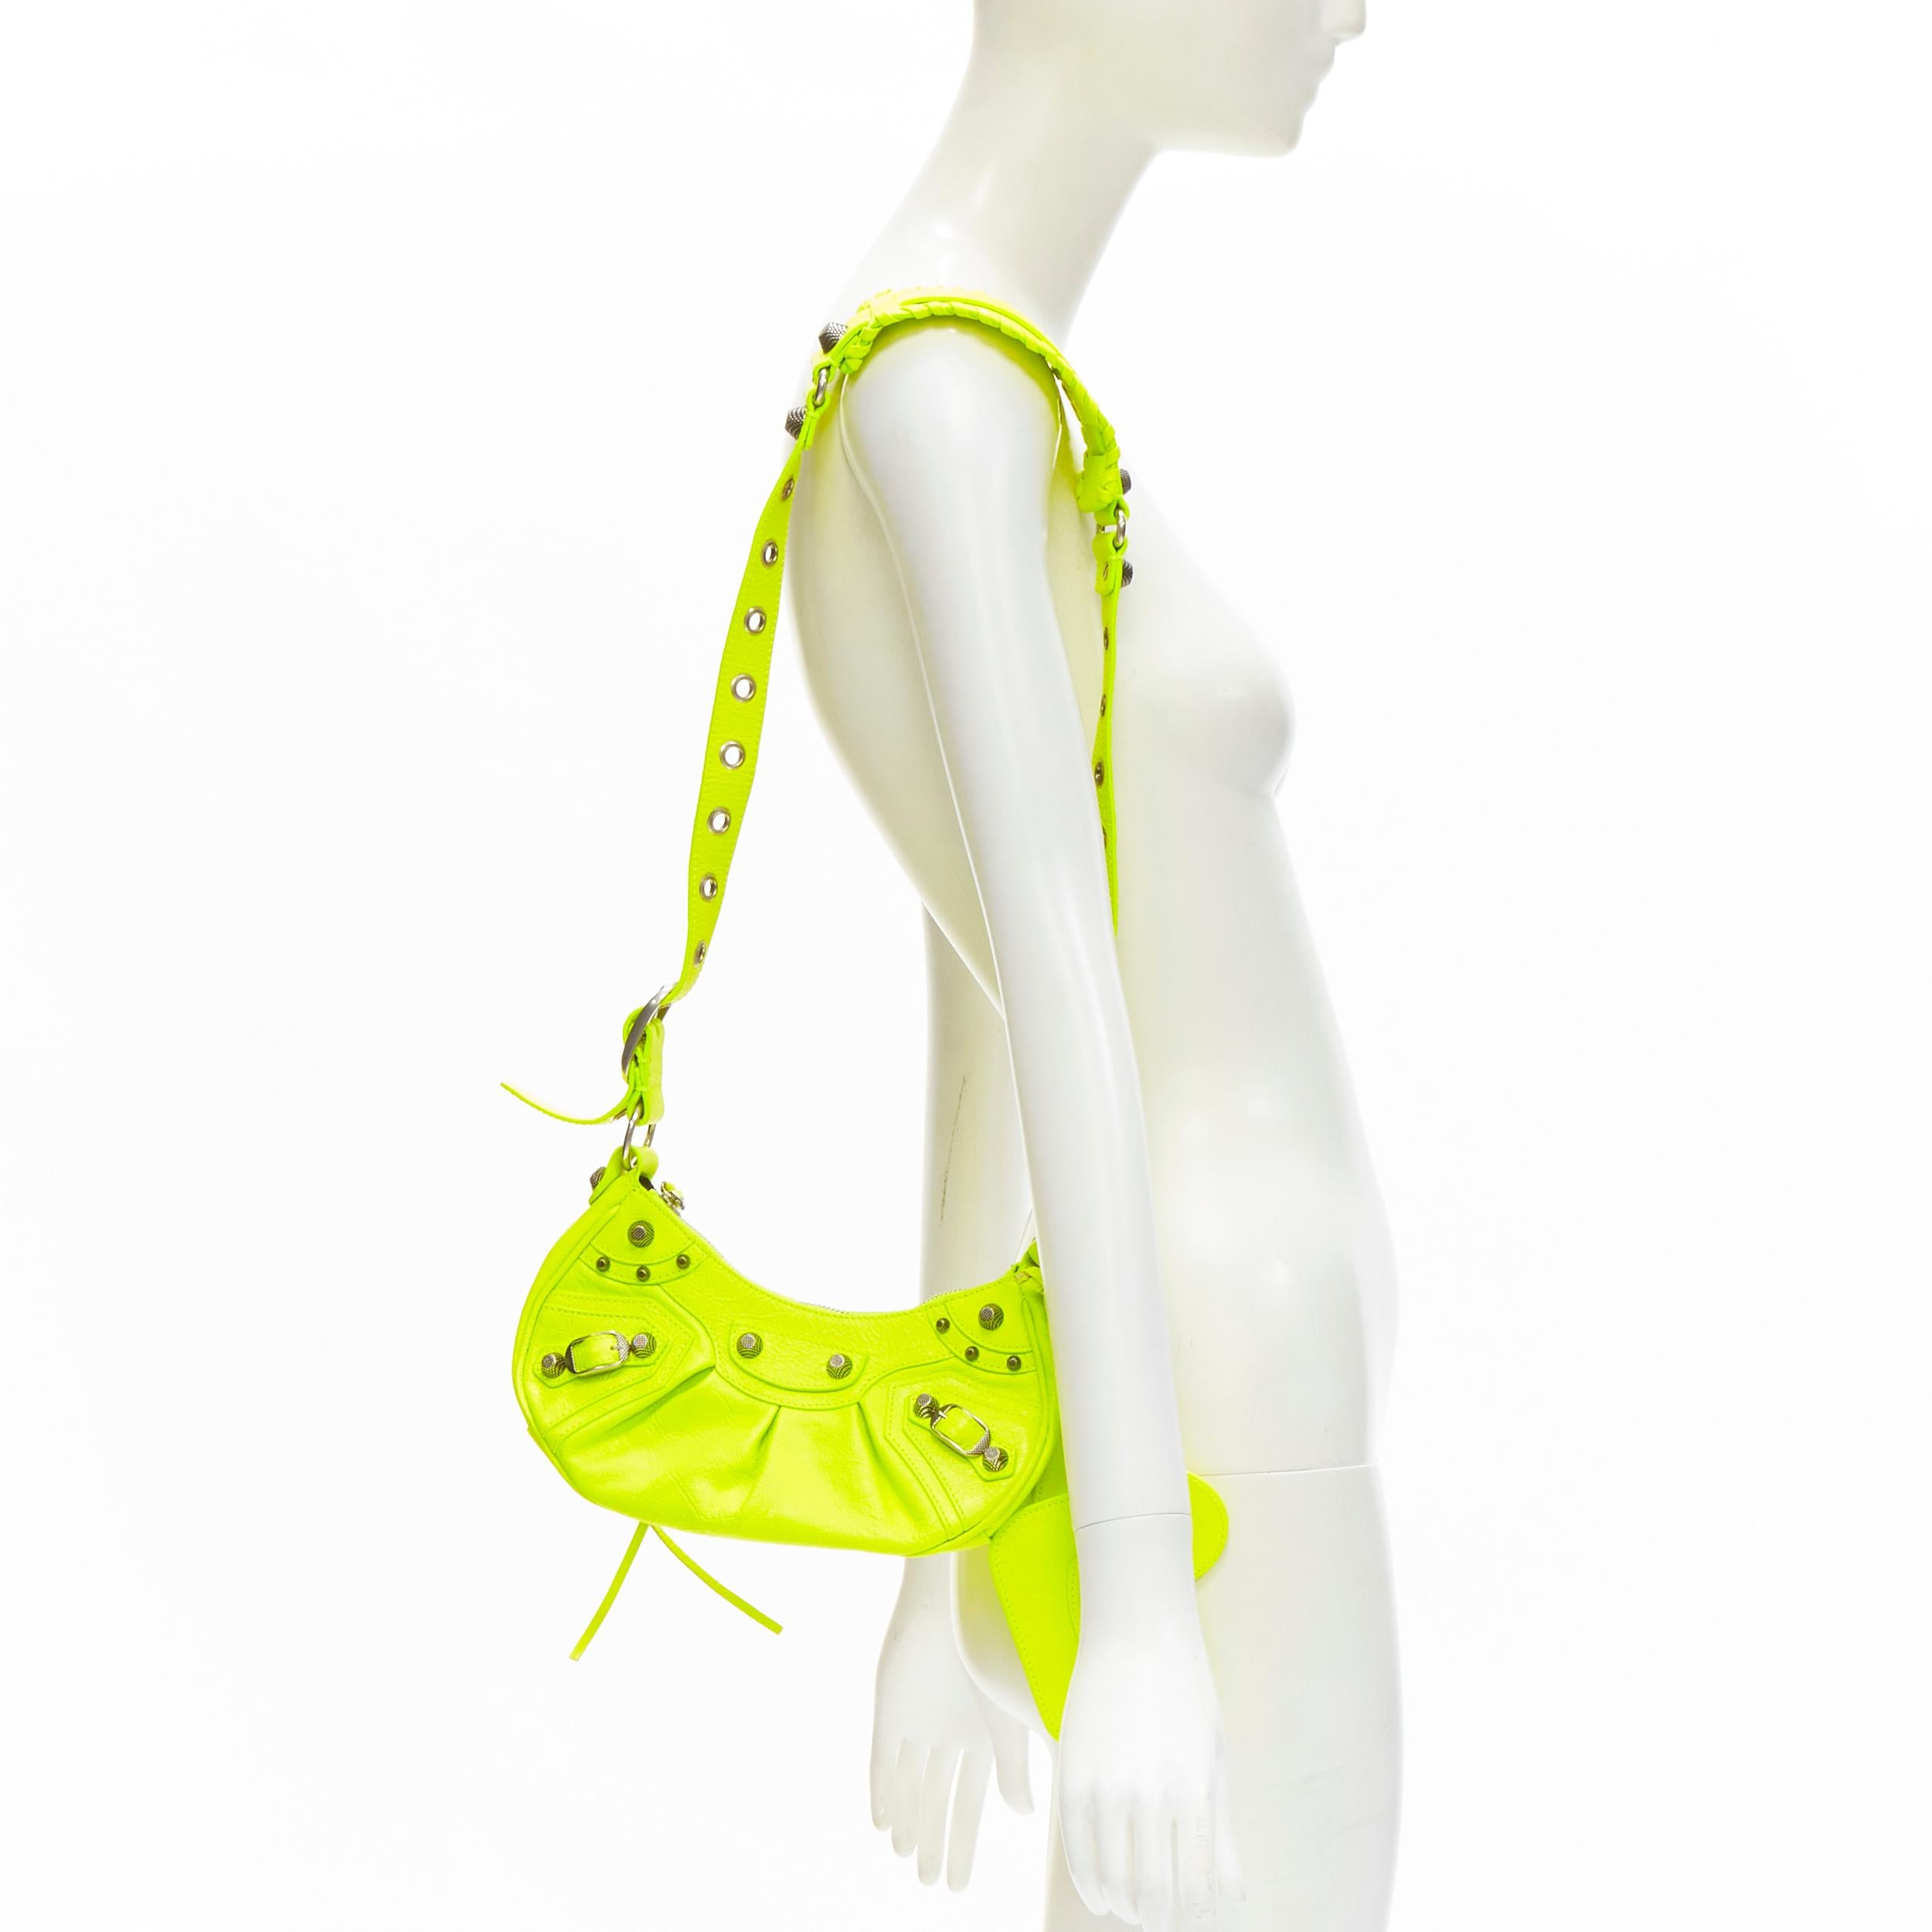 BALENCIAGA DEMNA LE Cagole XS neon yellow silver stud crossbody Motocross bag
Brand: Balenciaga
Designer: Demna
Model: Le Cagole XS
Material: Leather
Color: Yellow
Pattern: Solid
Closure: Zip
Extra Detail: Neon yellow crinkled leather. Antique